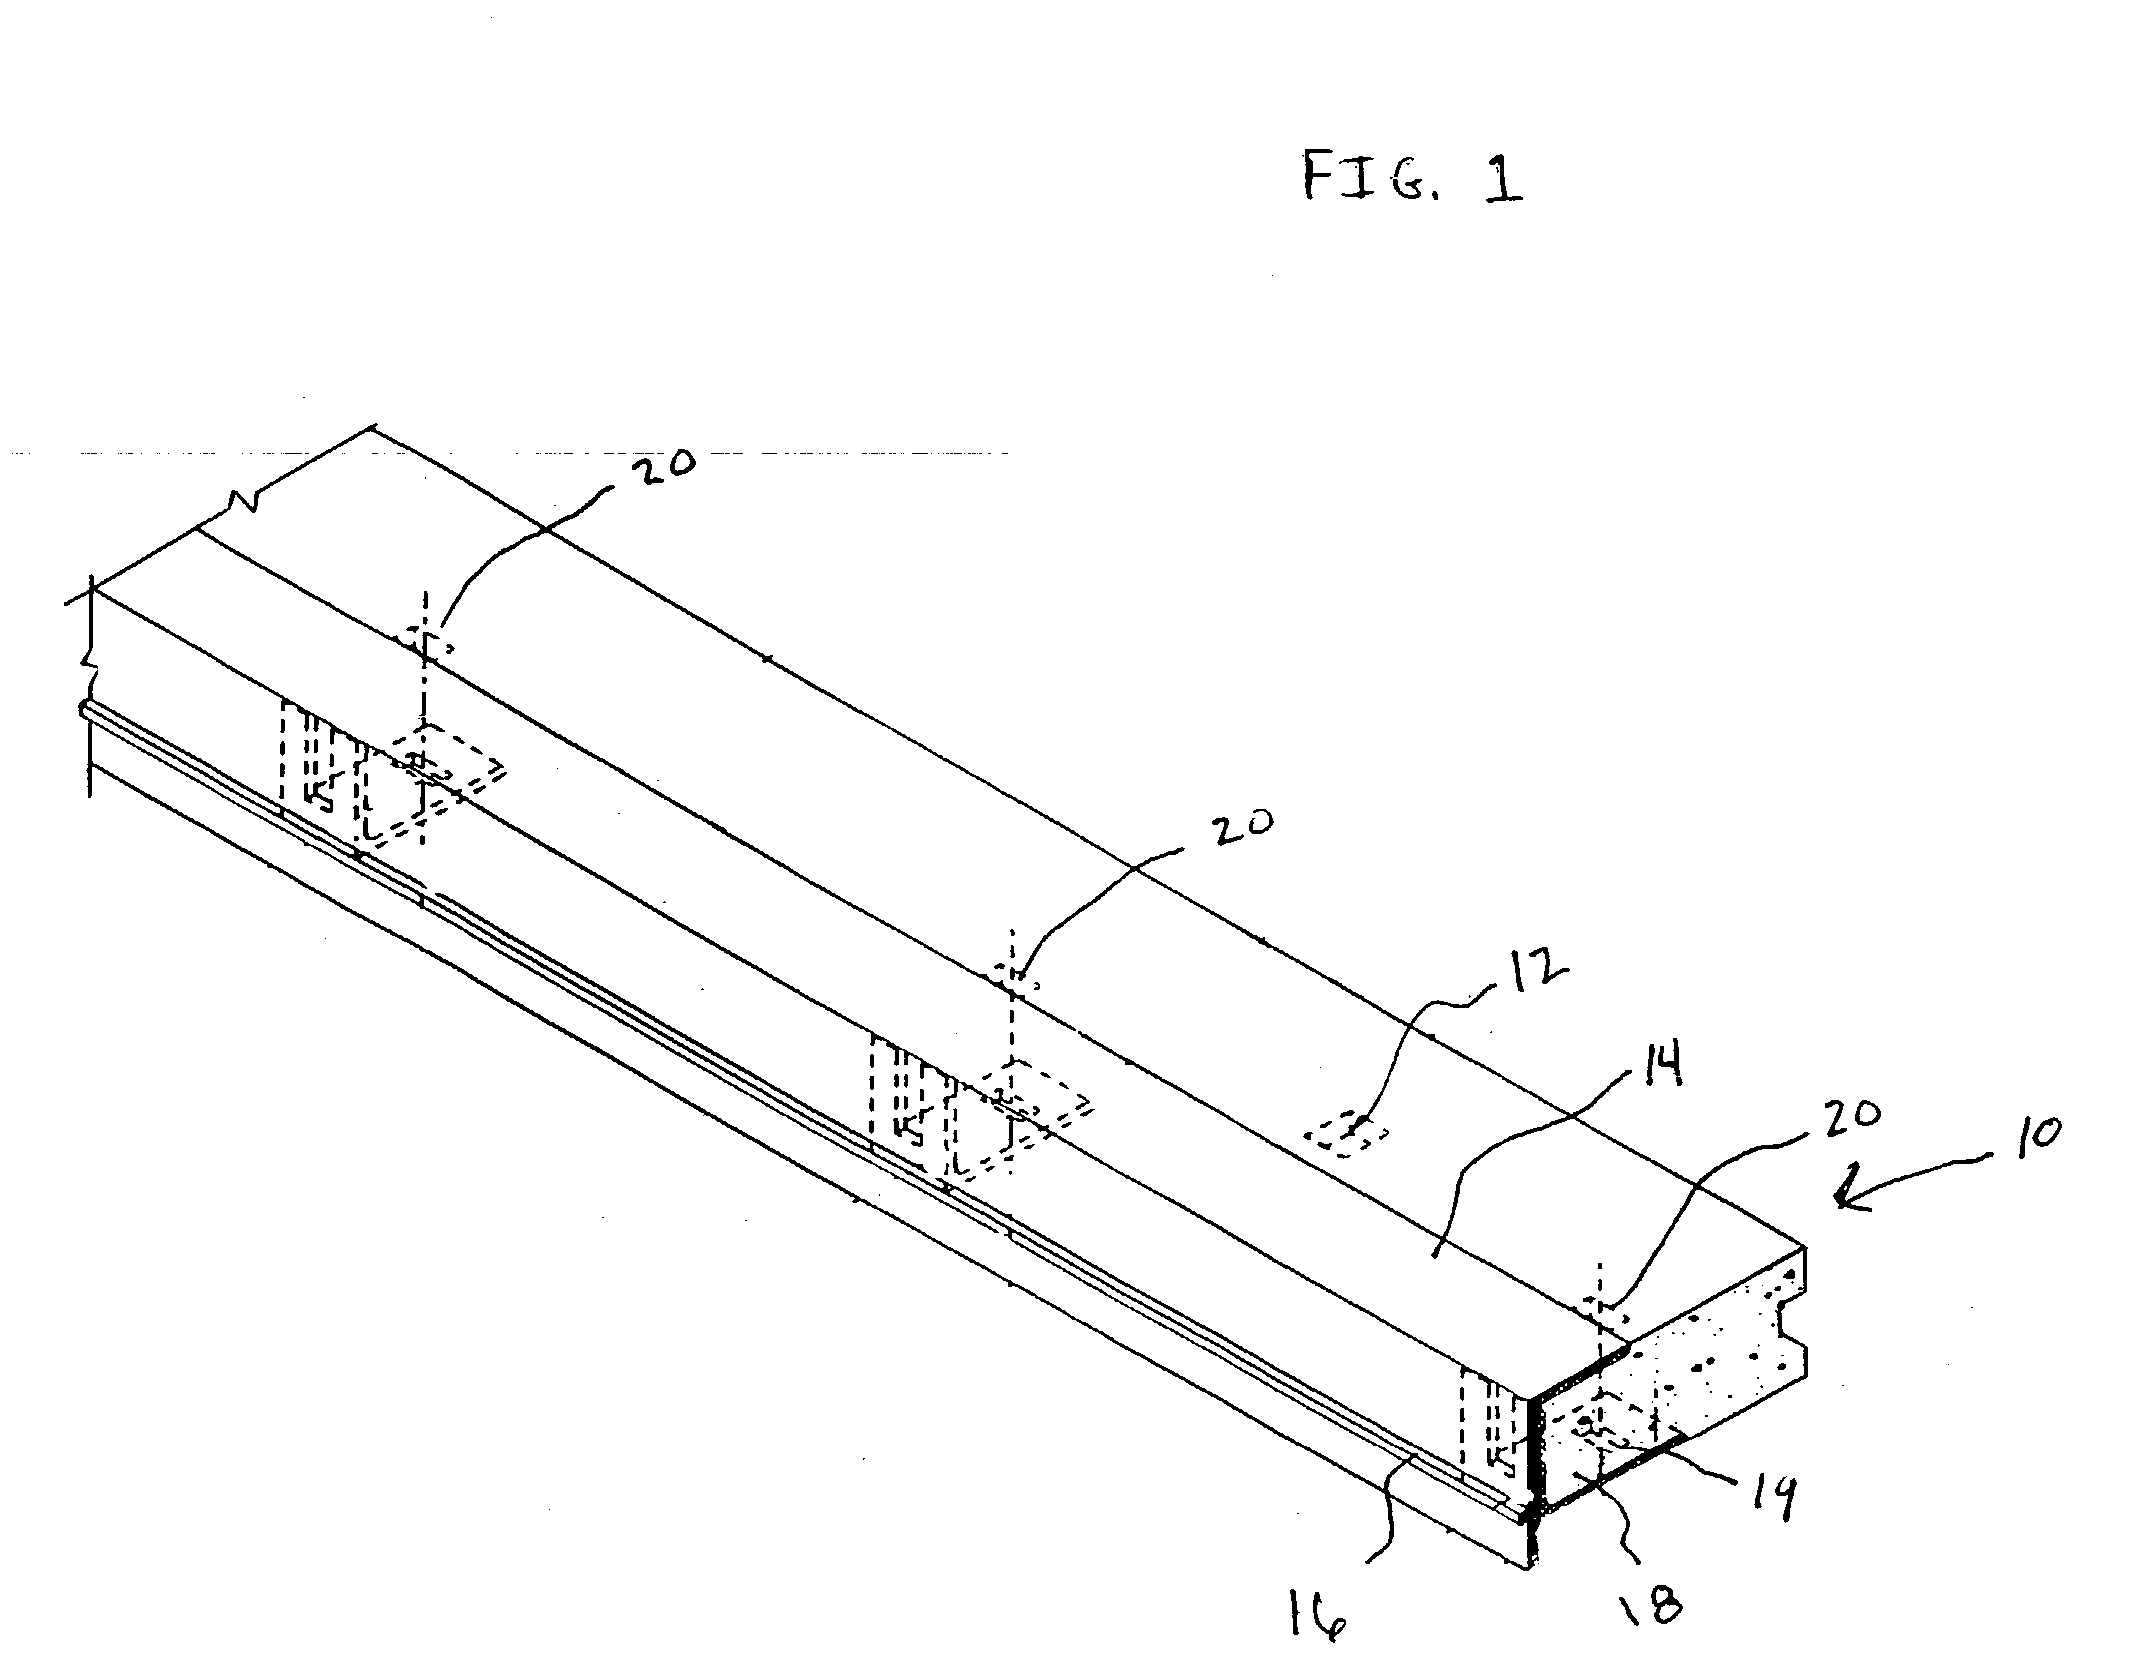 Precast composite header joint system and a method for forming and installing the same